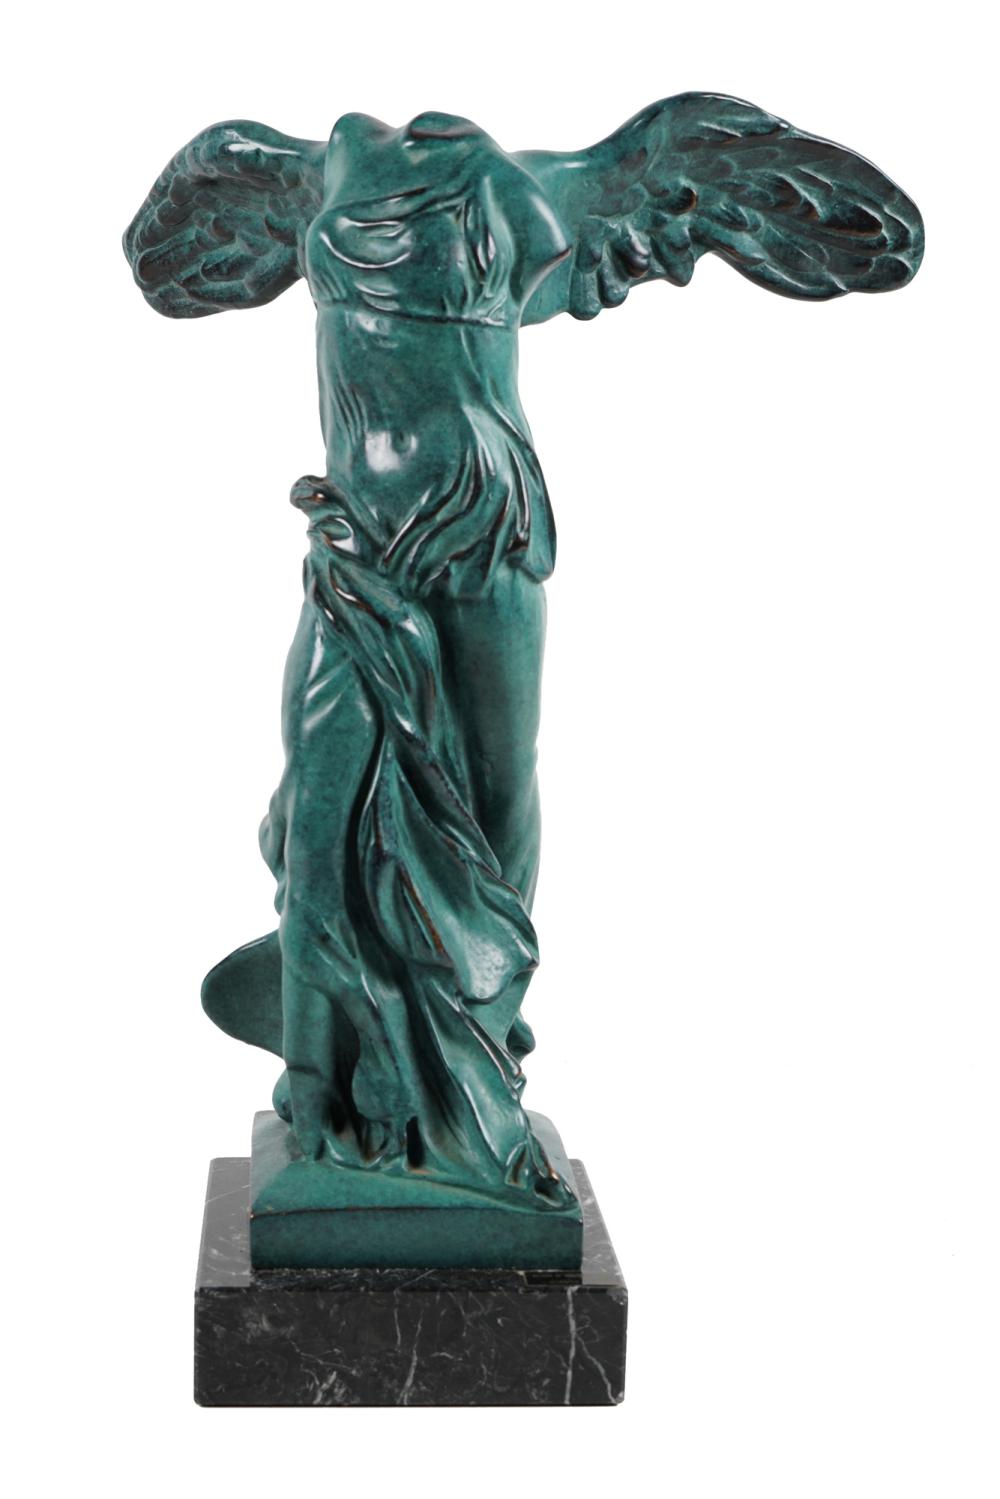 THE NIKE OF SAMOTHRACE (WINGED VICTORY)patinated